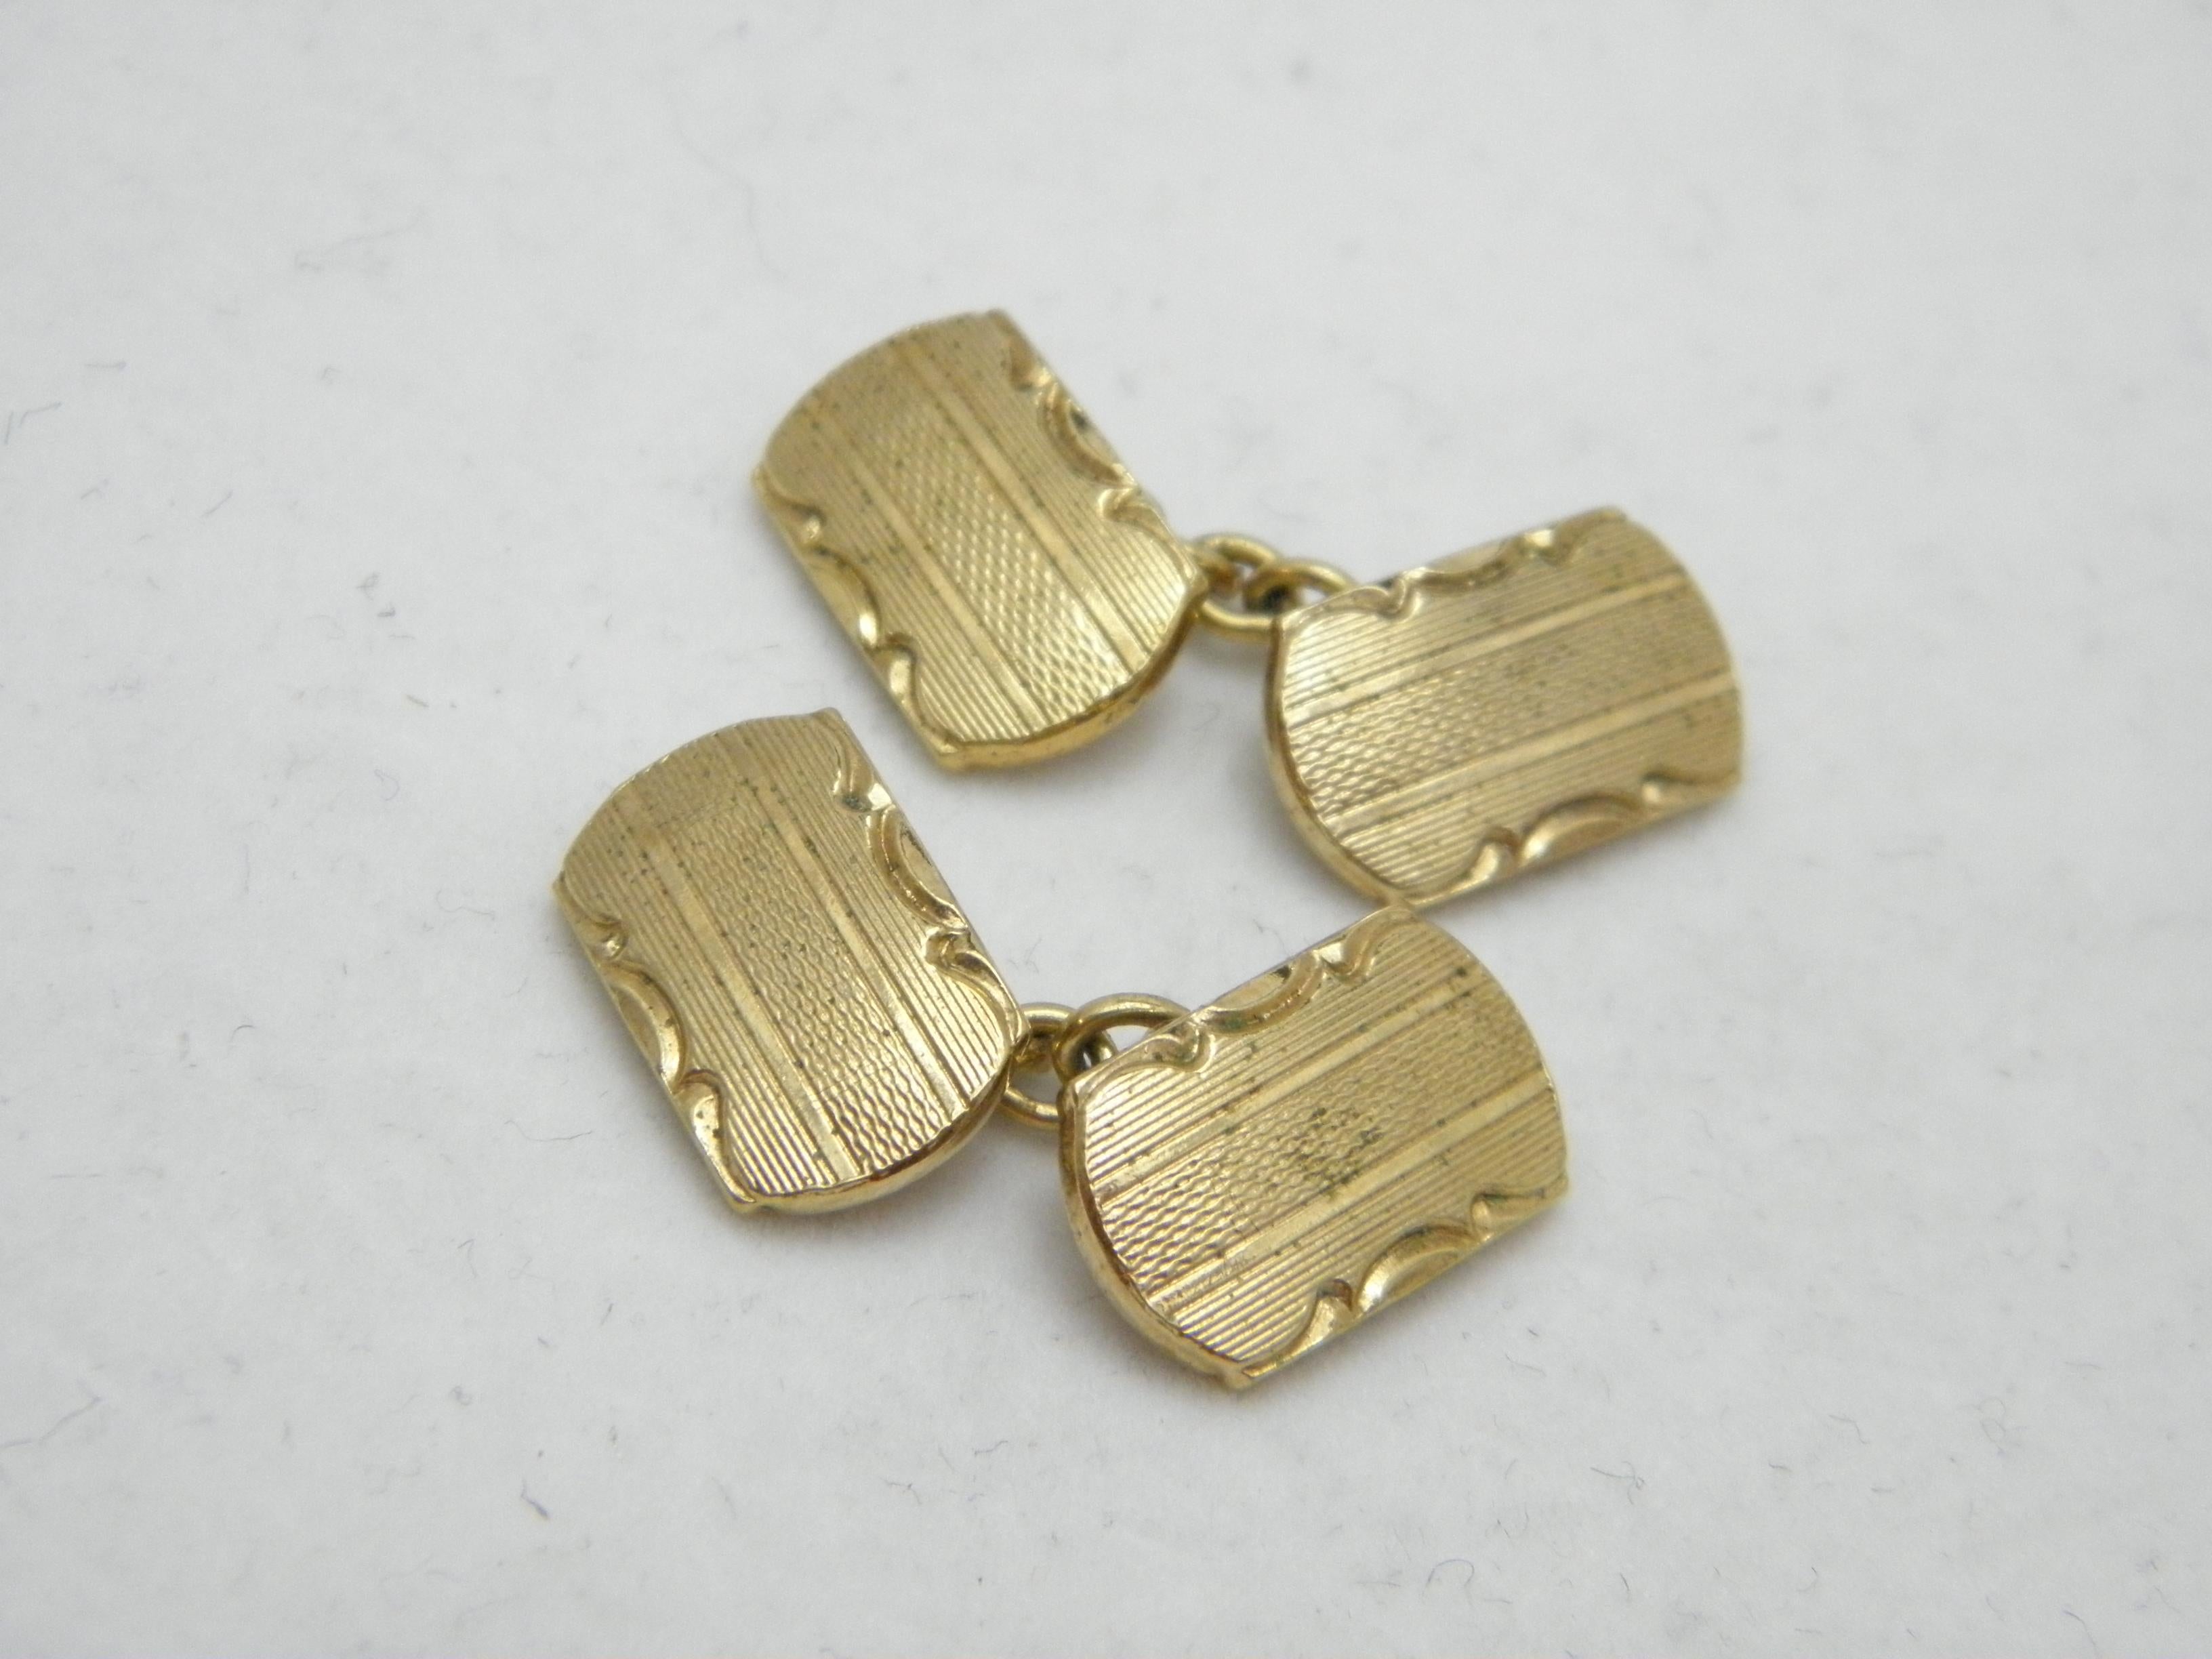 If you have landed on this page then you have an eye for beauty.

On offer is this gorgeous

9CT SOLID GOLD THICK CHAIN LINK CUFFLINKS

DETAILS
Material: 9ct (375/000) Solid Yellow Gold
Style: Classic Victorian chain linked, double panelled cuff